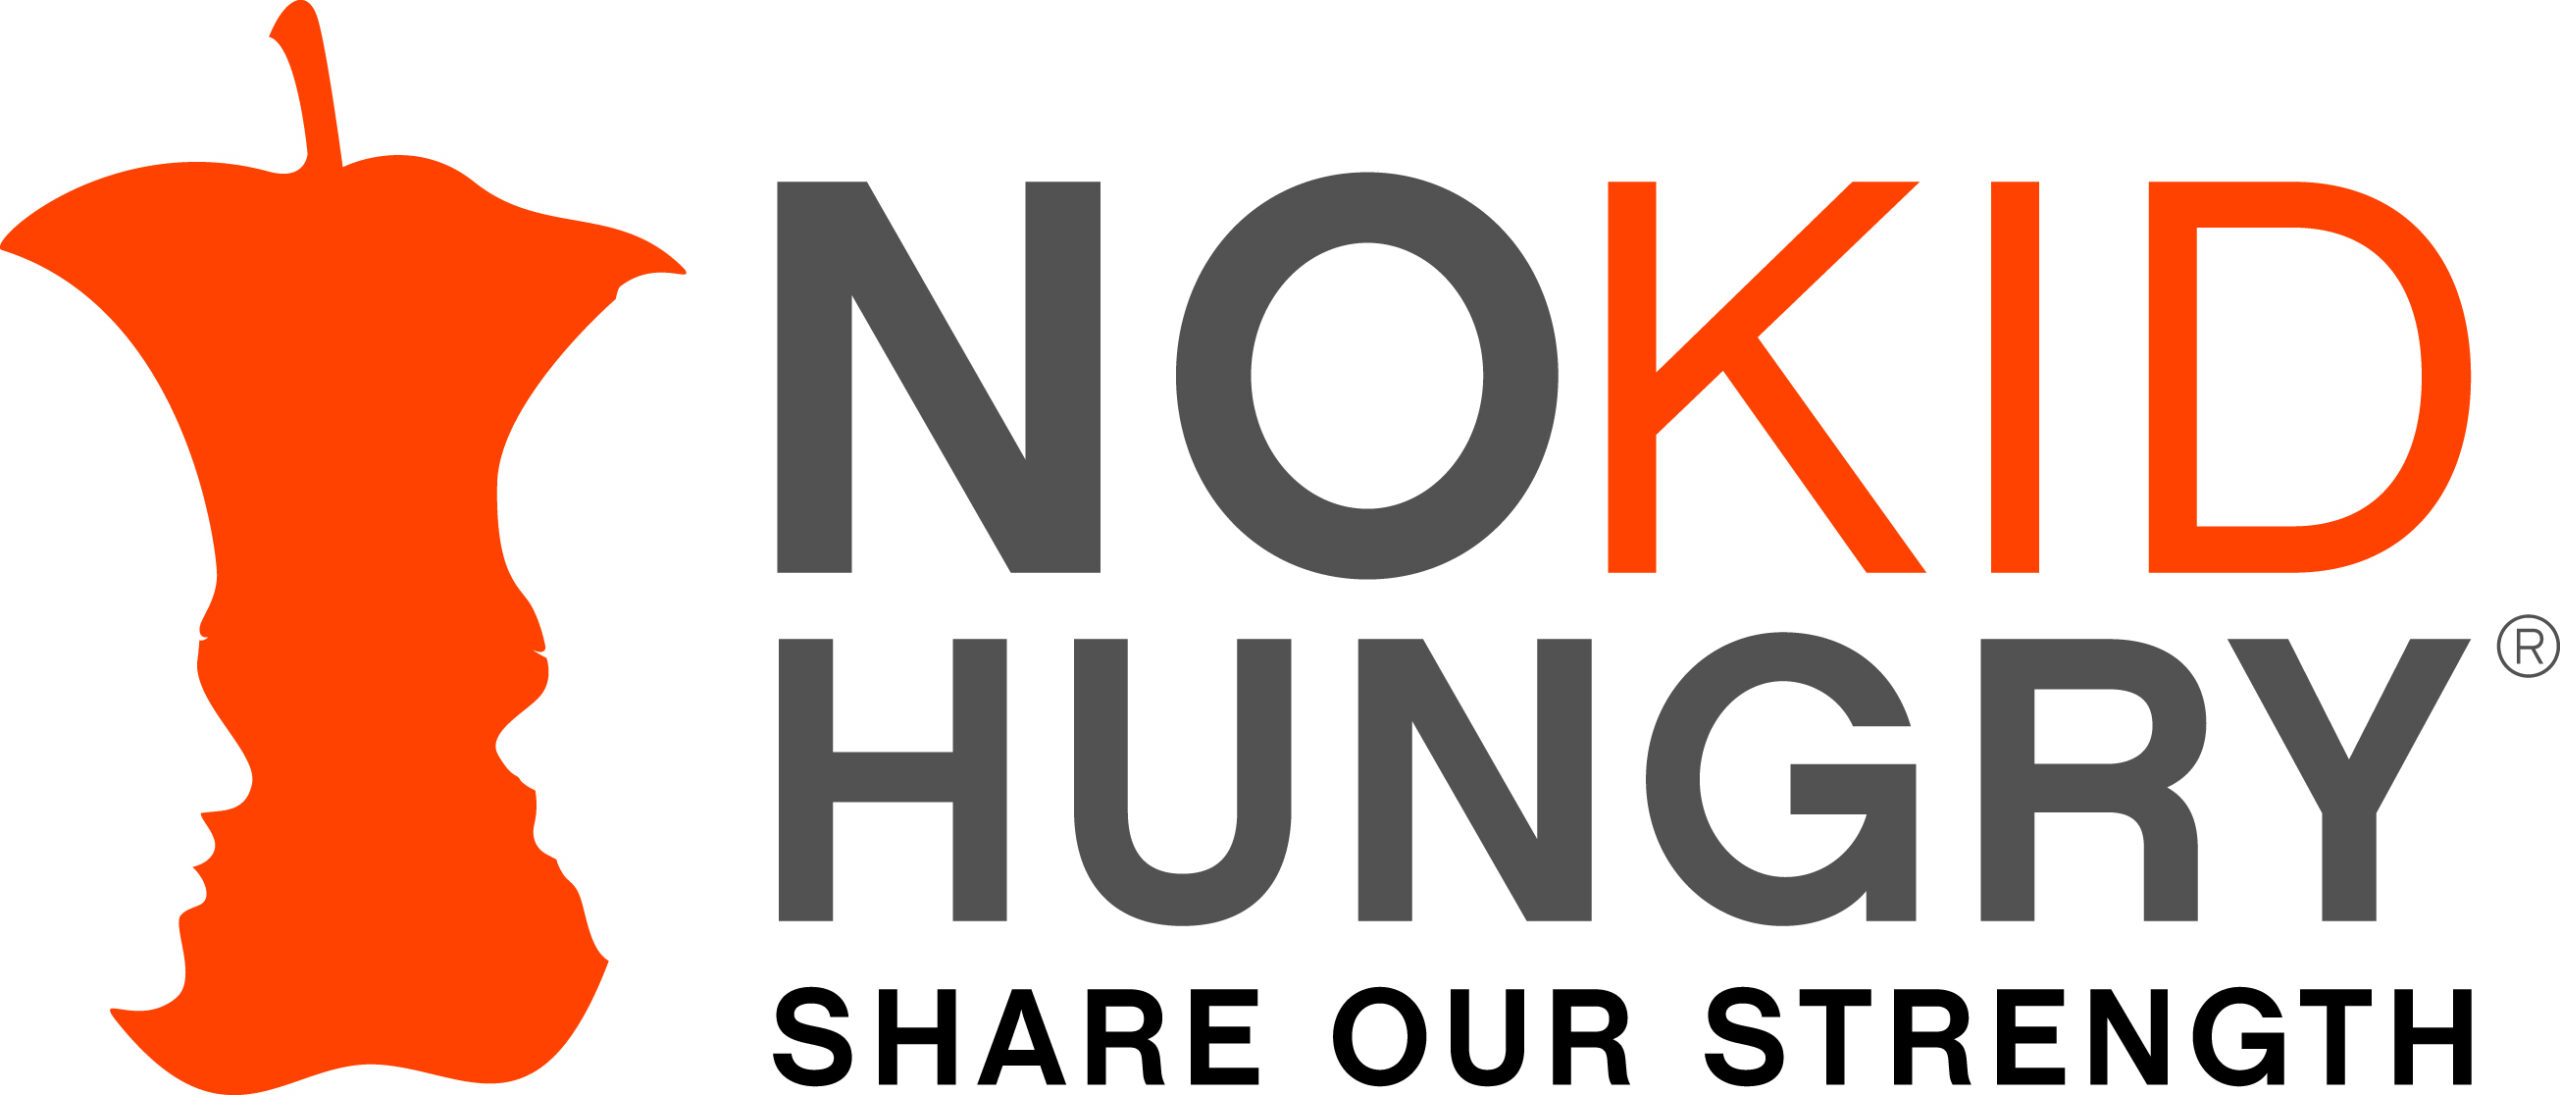 NoKidHungry_campaign_10june2